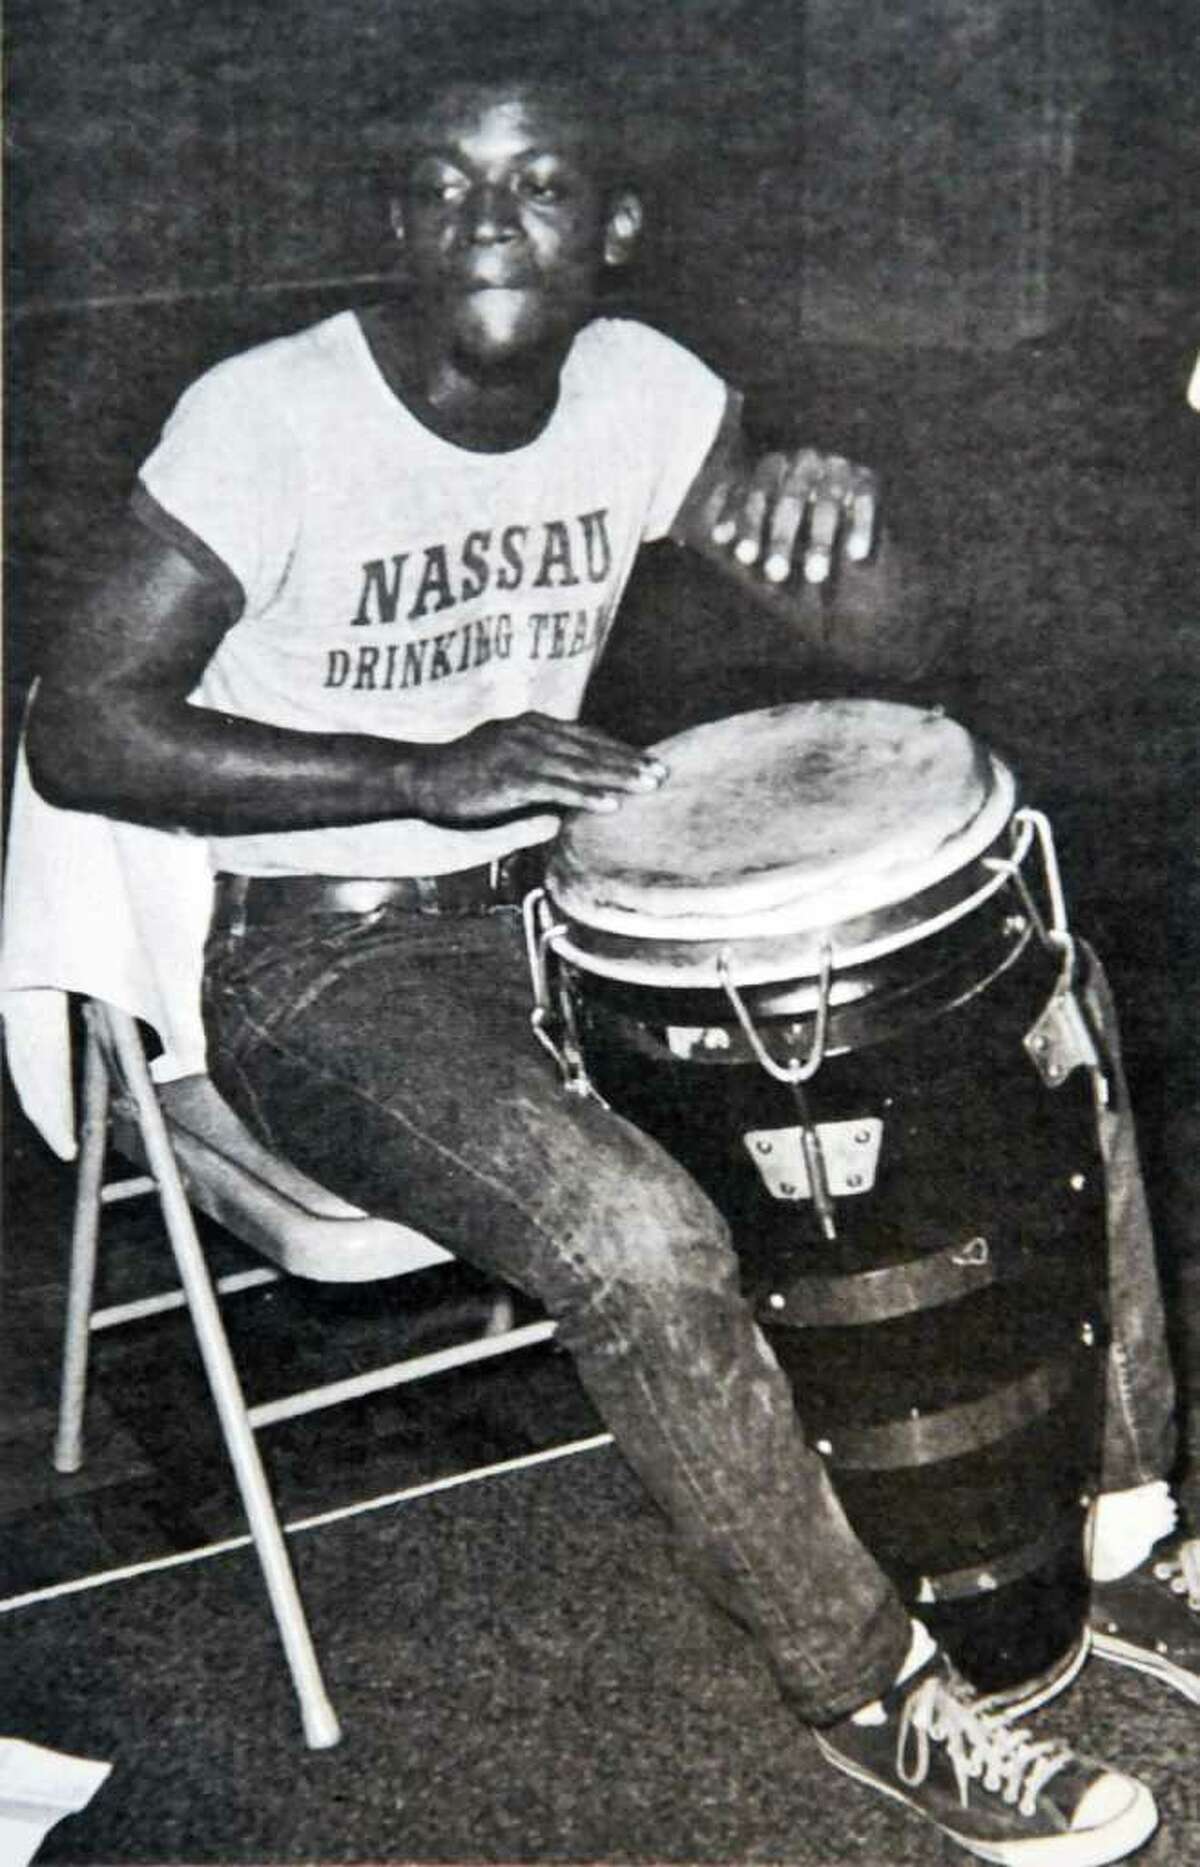 Photo courtesy of Eddie Ade Knowles: Eddie Ade Knowles, now a vice president at RPI as an original member of Gil Scott-Heron's band .